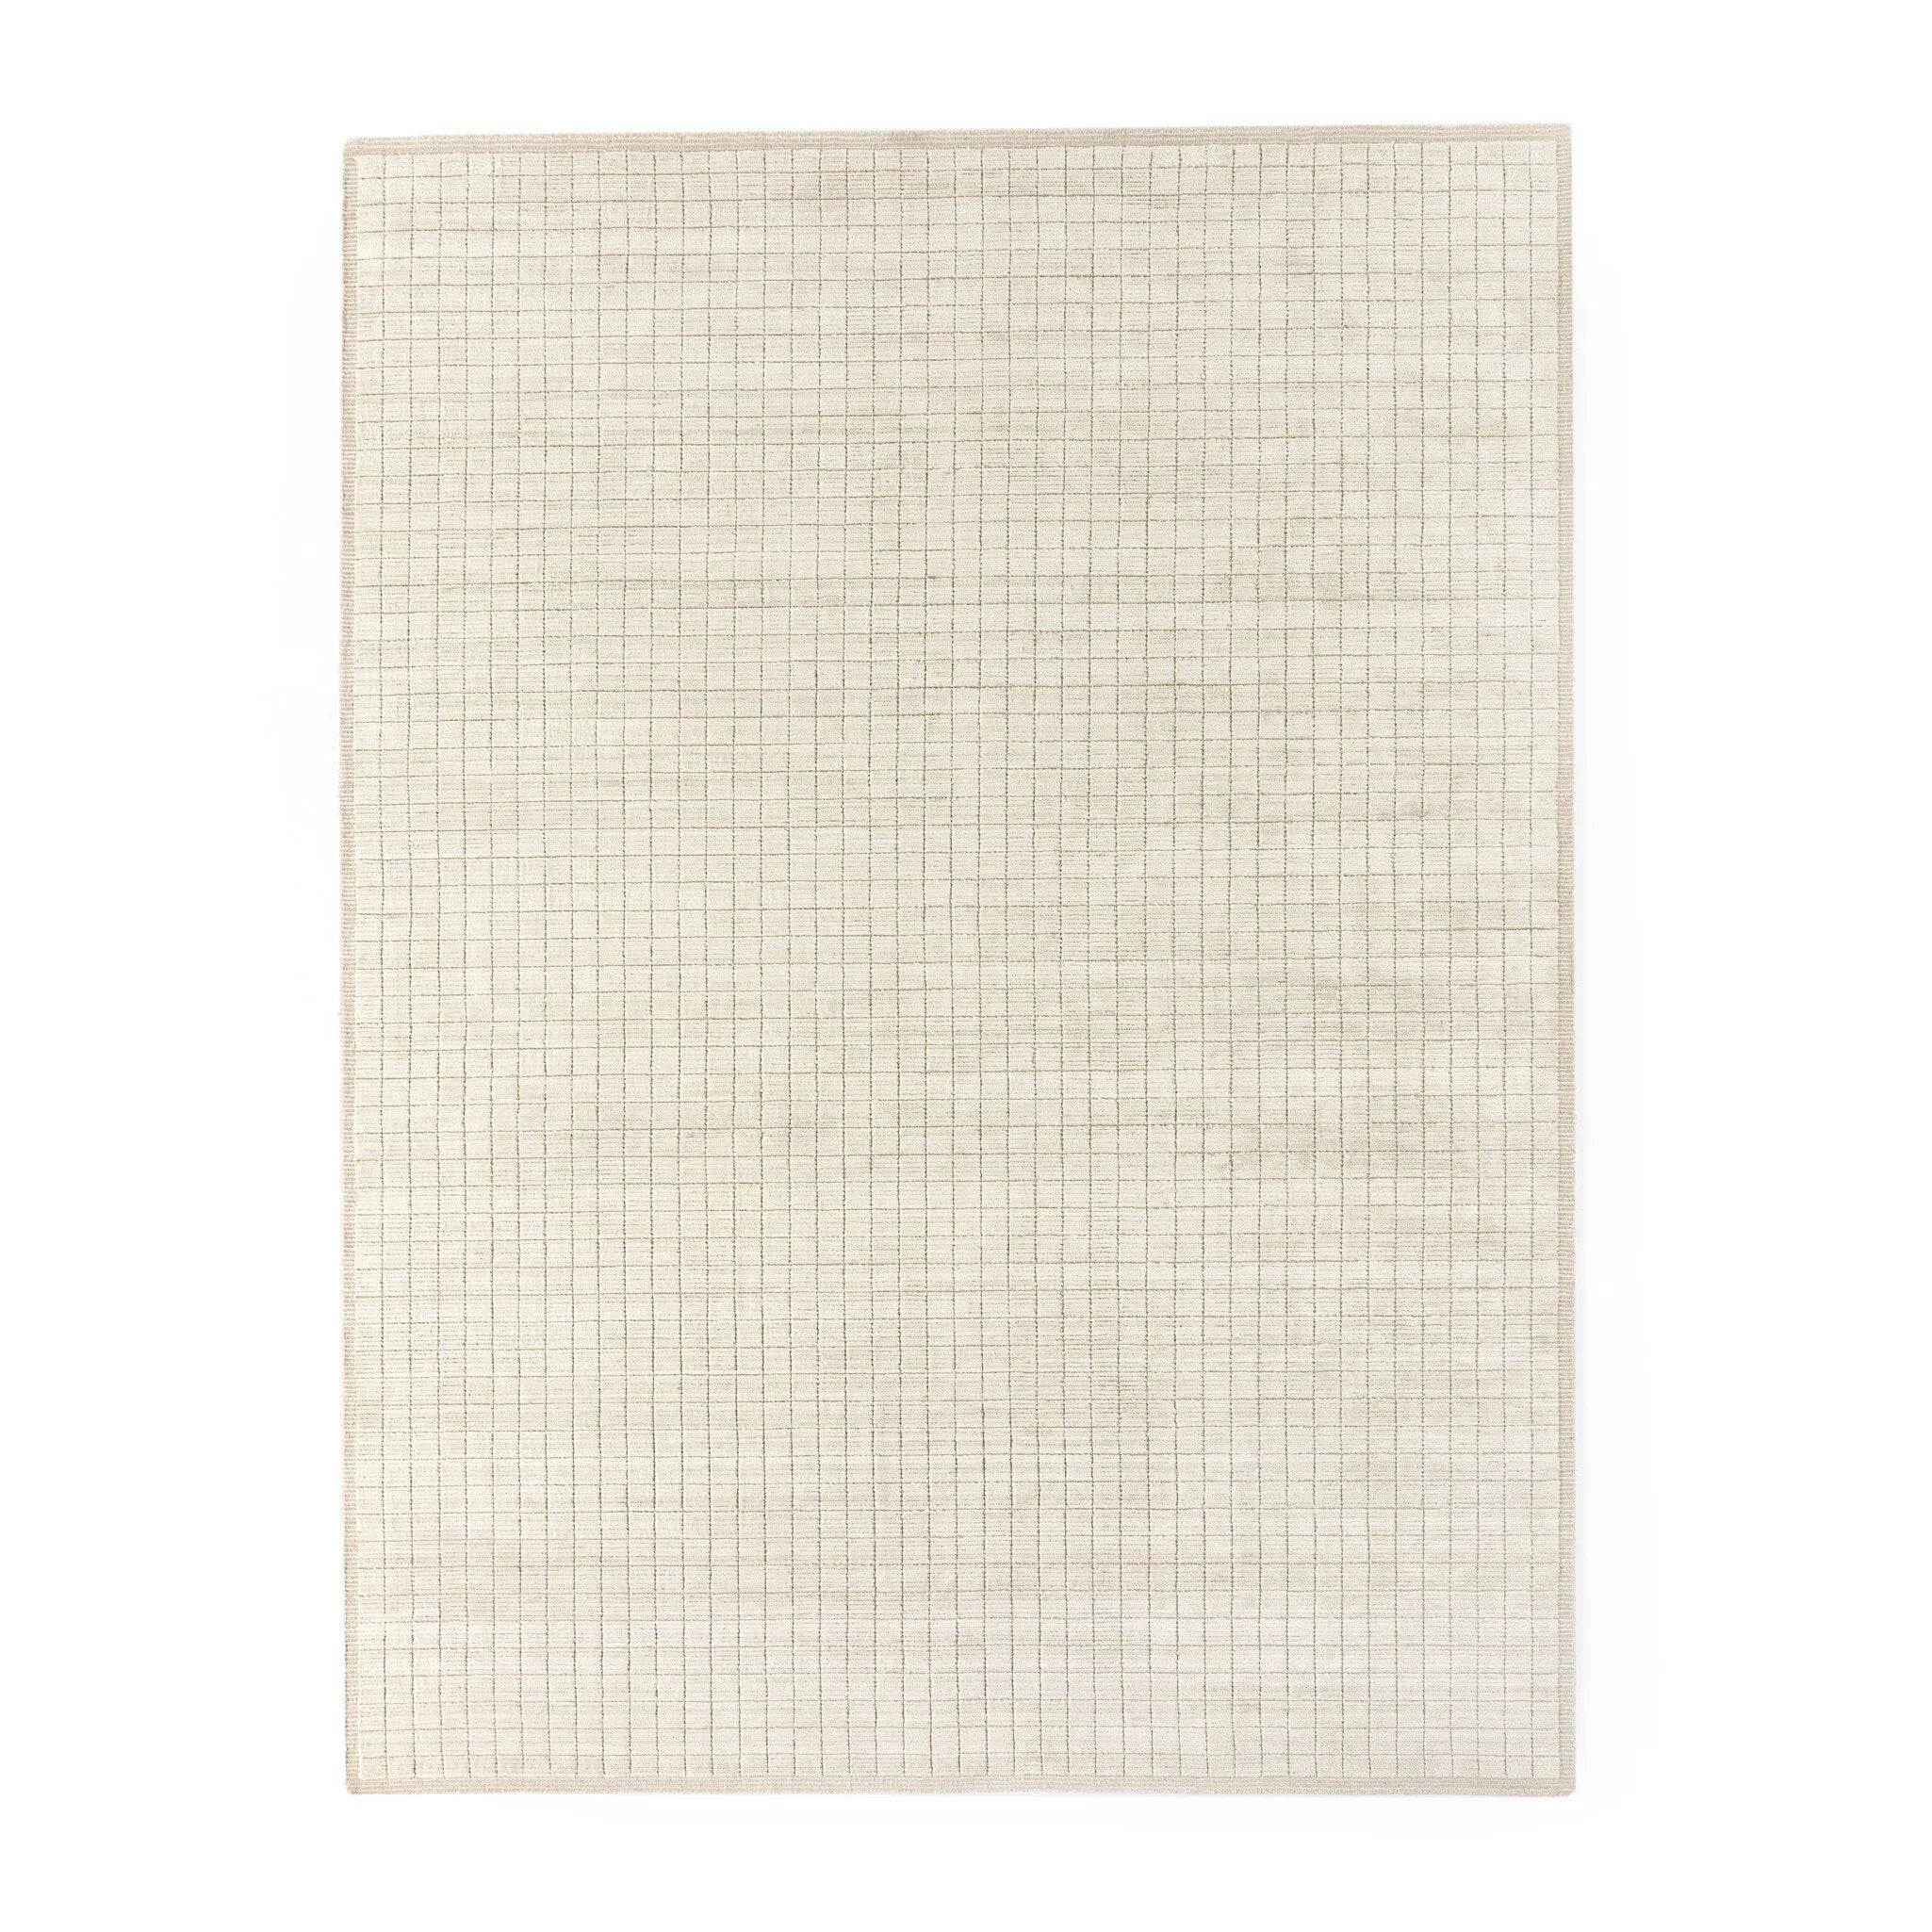 Monochromatic and linear, the subtle grid pattern of this hand-loomed wool-blend rug offers an innovative take on a neutral.Overall Dimensions96.00"w x 0.35"d x 120.00"hFull Details &amp; SpecificationsTear SheetCleaning Code : W (water-Based Amethyst Home provides interior design, new home construction design consulting, vintage area rugs, and lighting in the Charlotte metro area.